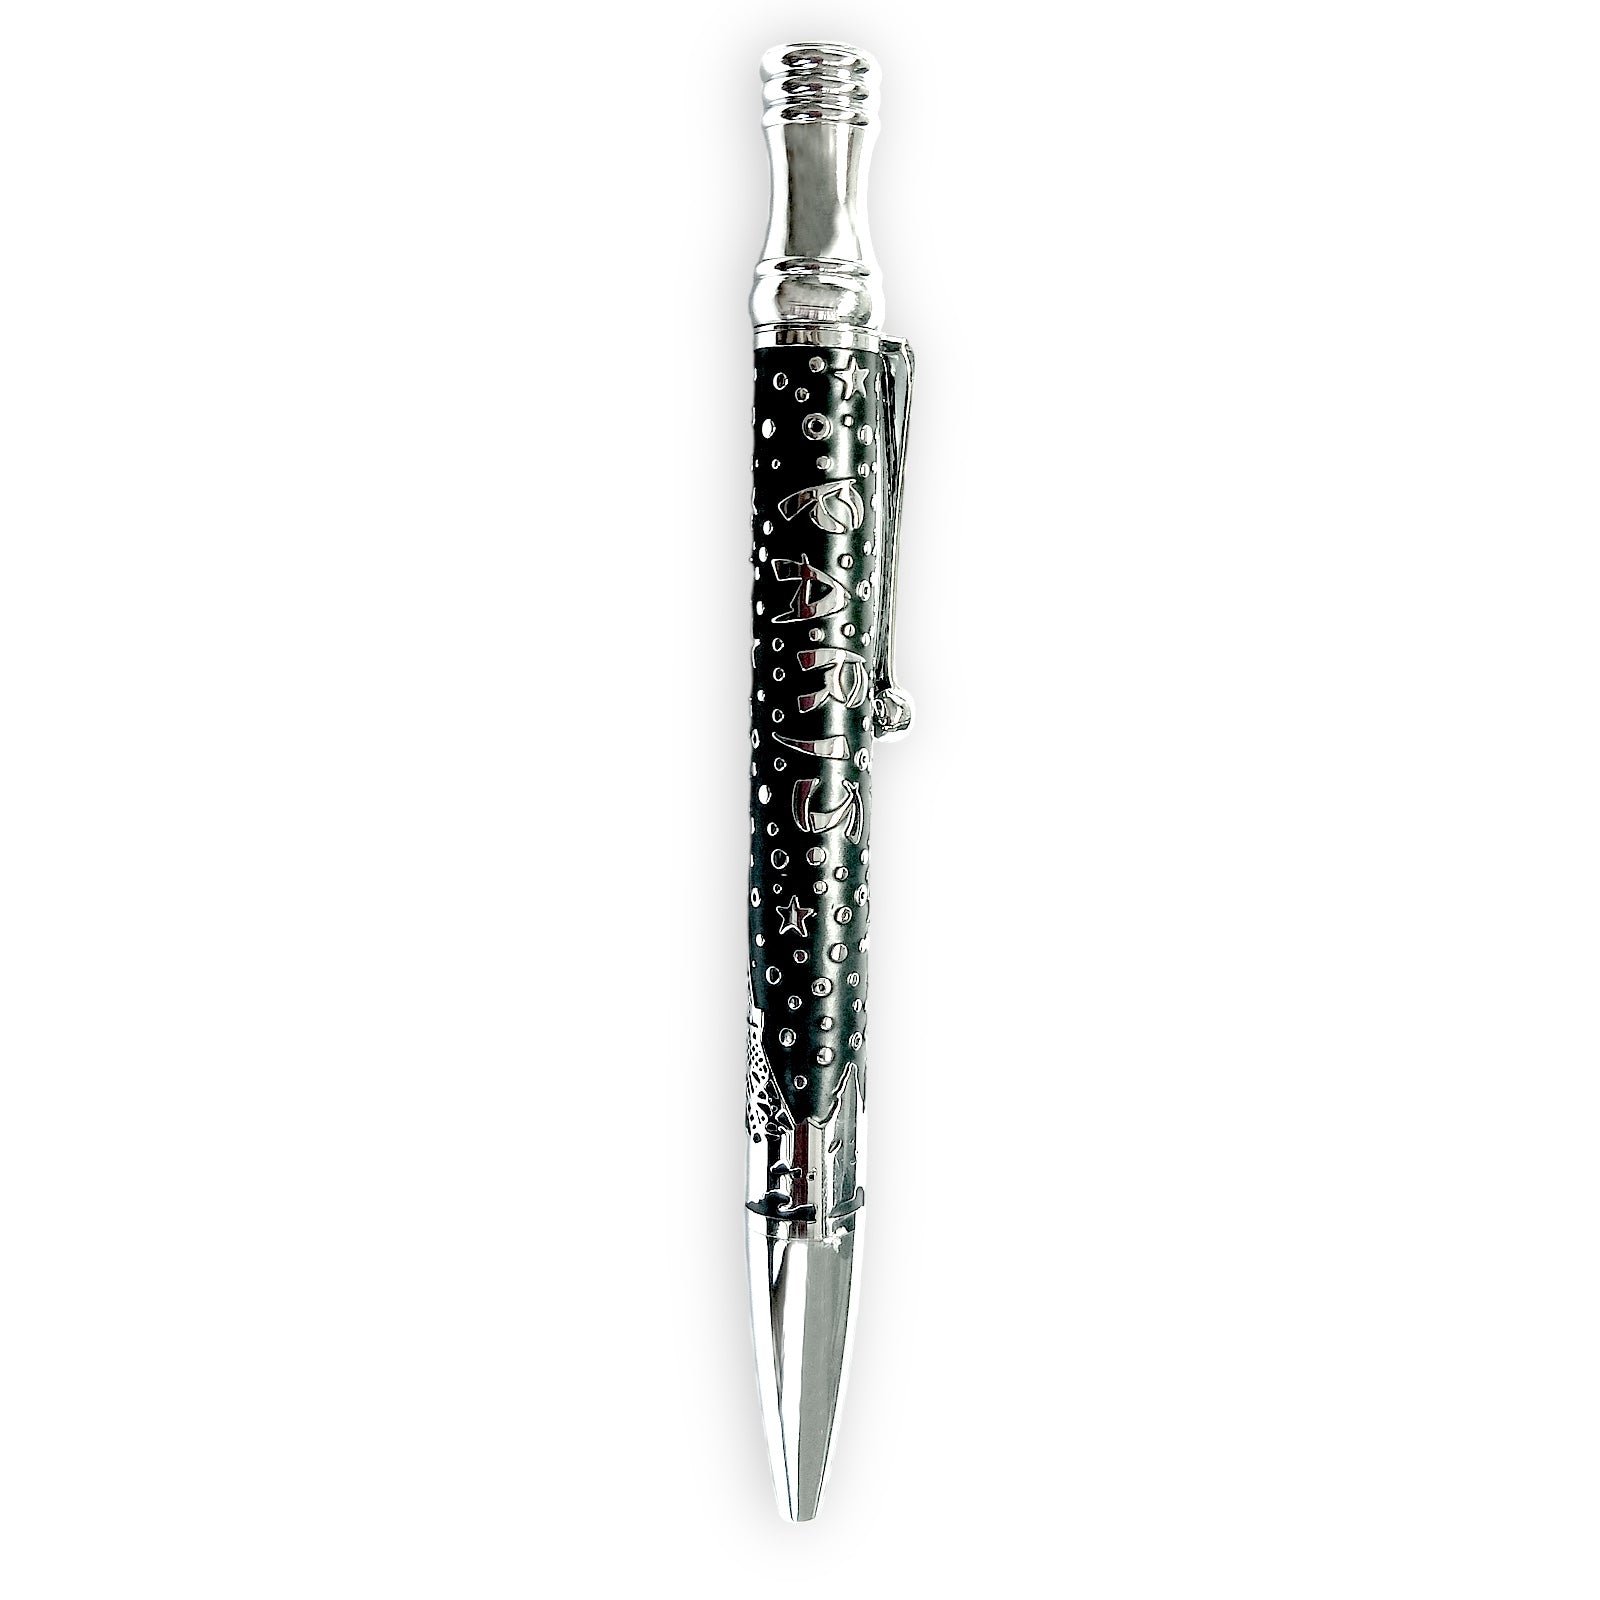 Luxury Black Handcrafted Writing Pen Paris Party Theme